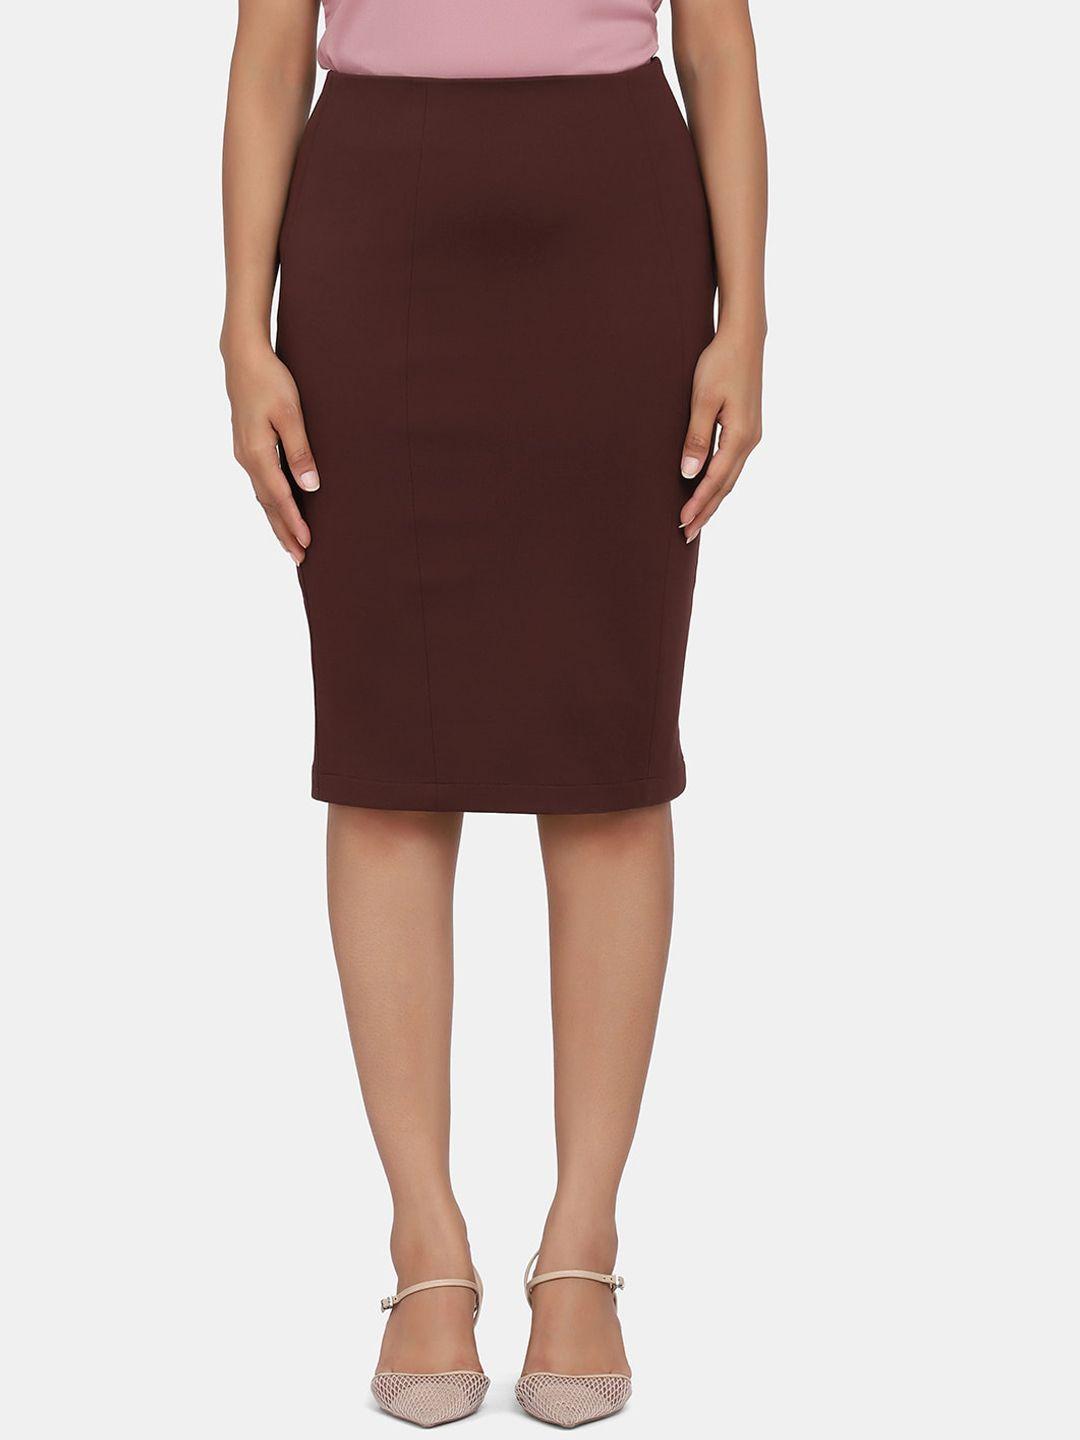 powersutra women brown solid knee length pencil skirts